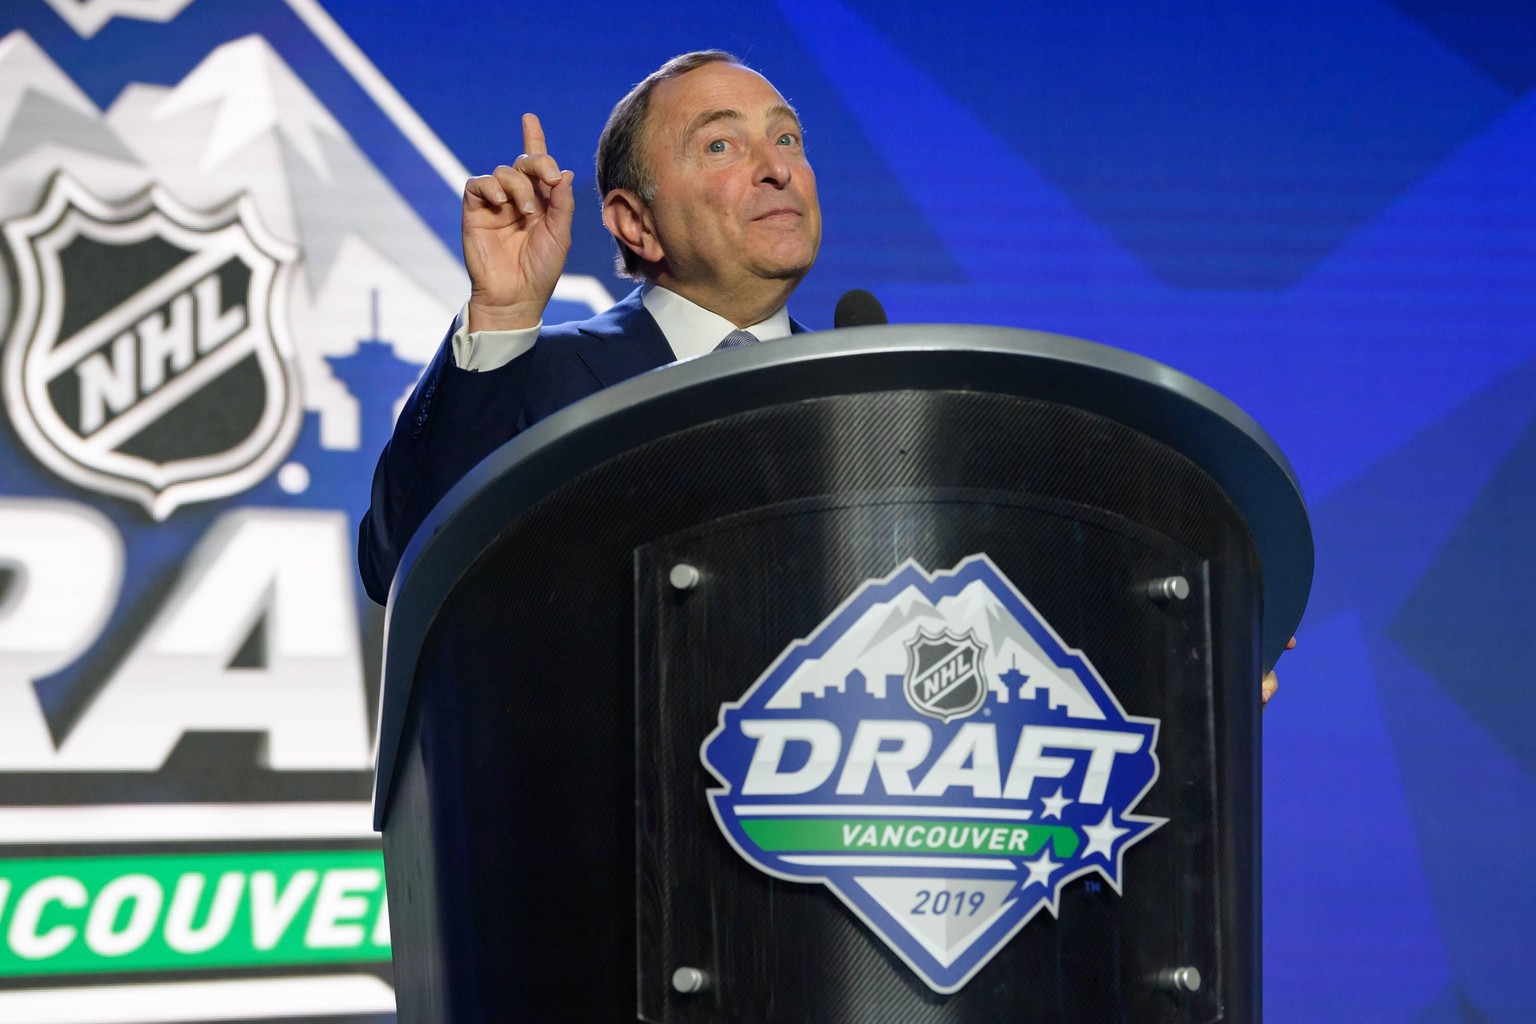 VANCOUVER, BC - JUNE 21: NHL, Eishockey Herren, USA Commissioner Gary Bettman on stage prior to the first round of the 2019 NHL Draft at Rogers Arena on June 21, 2019 in Vancouver, British Columbia, C ...